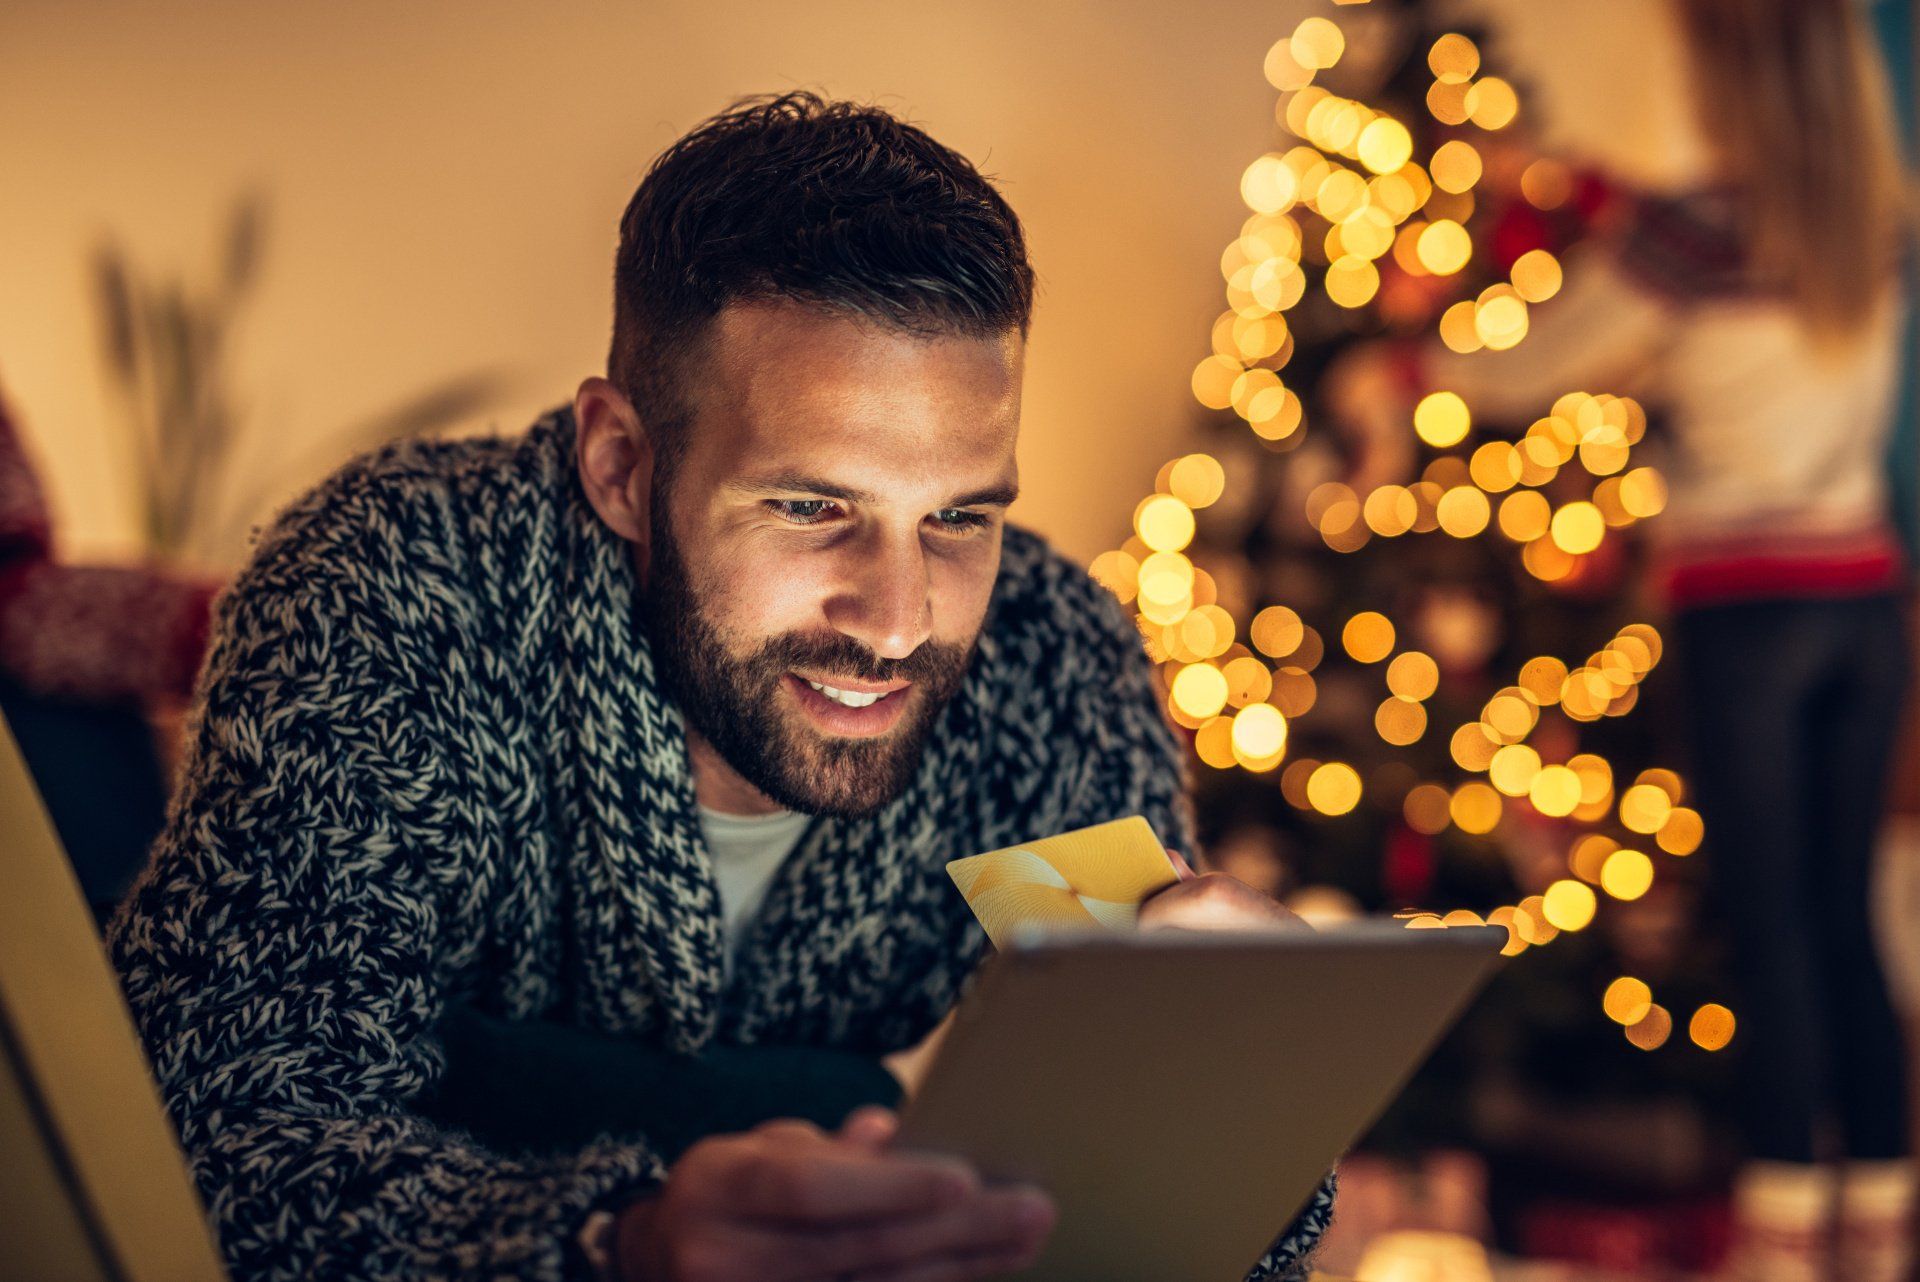 Image of a man holiday shopping online with a lit-up Christmas tree in a cozy and warm background